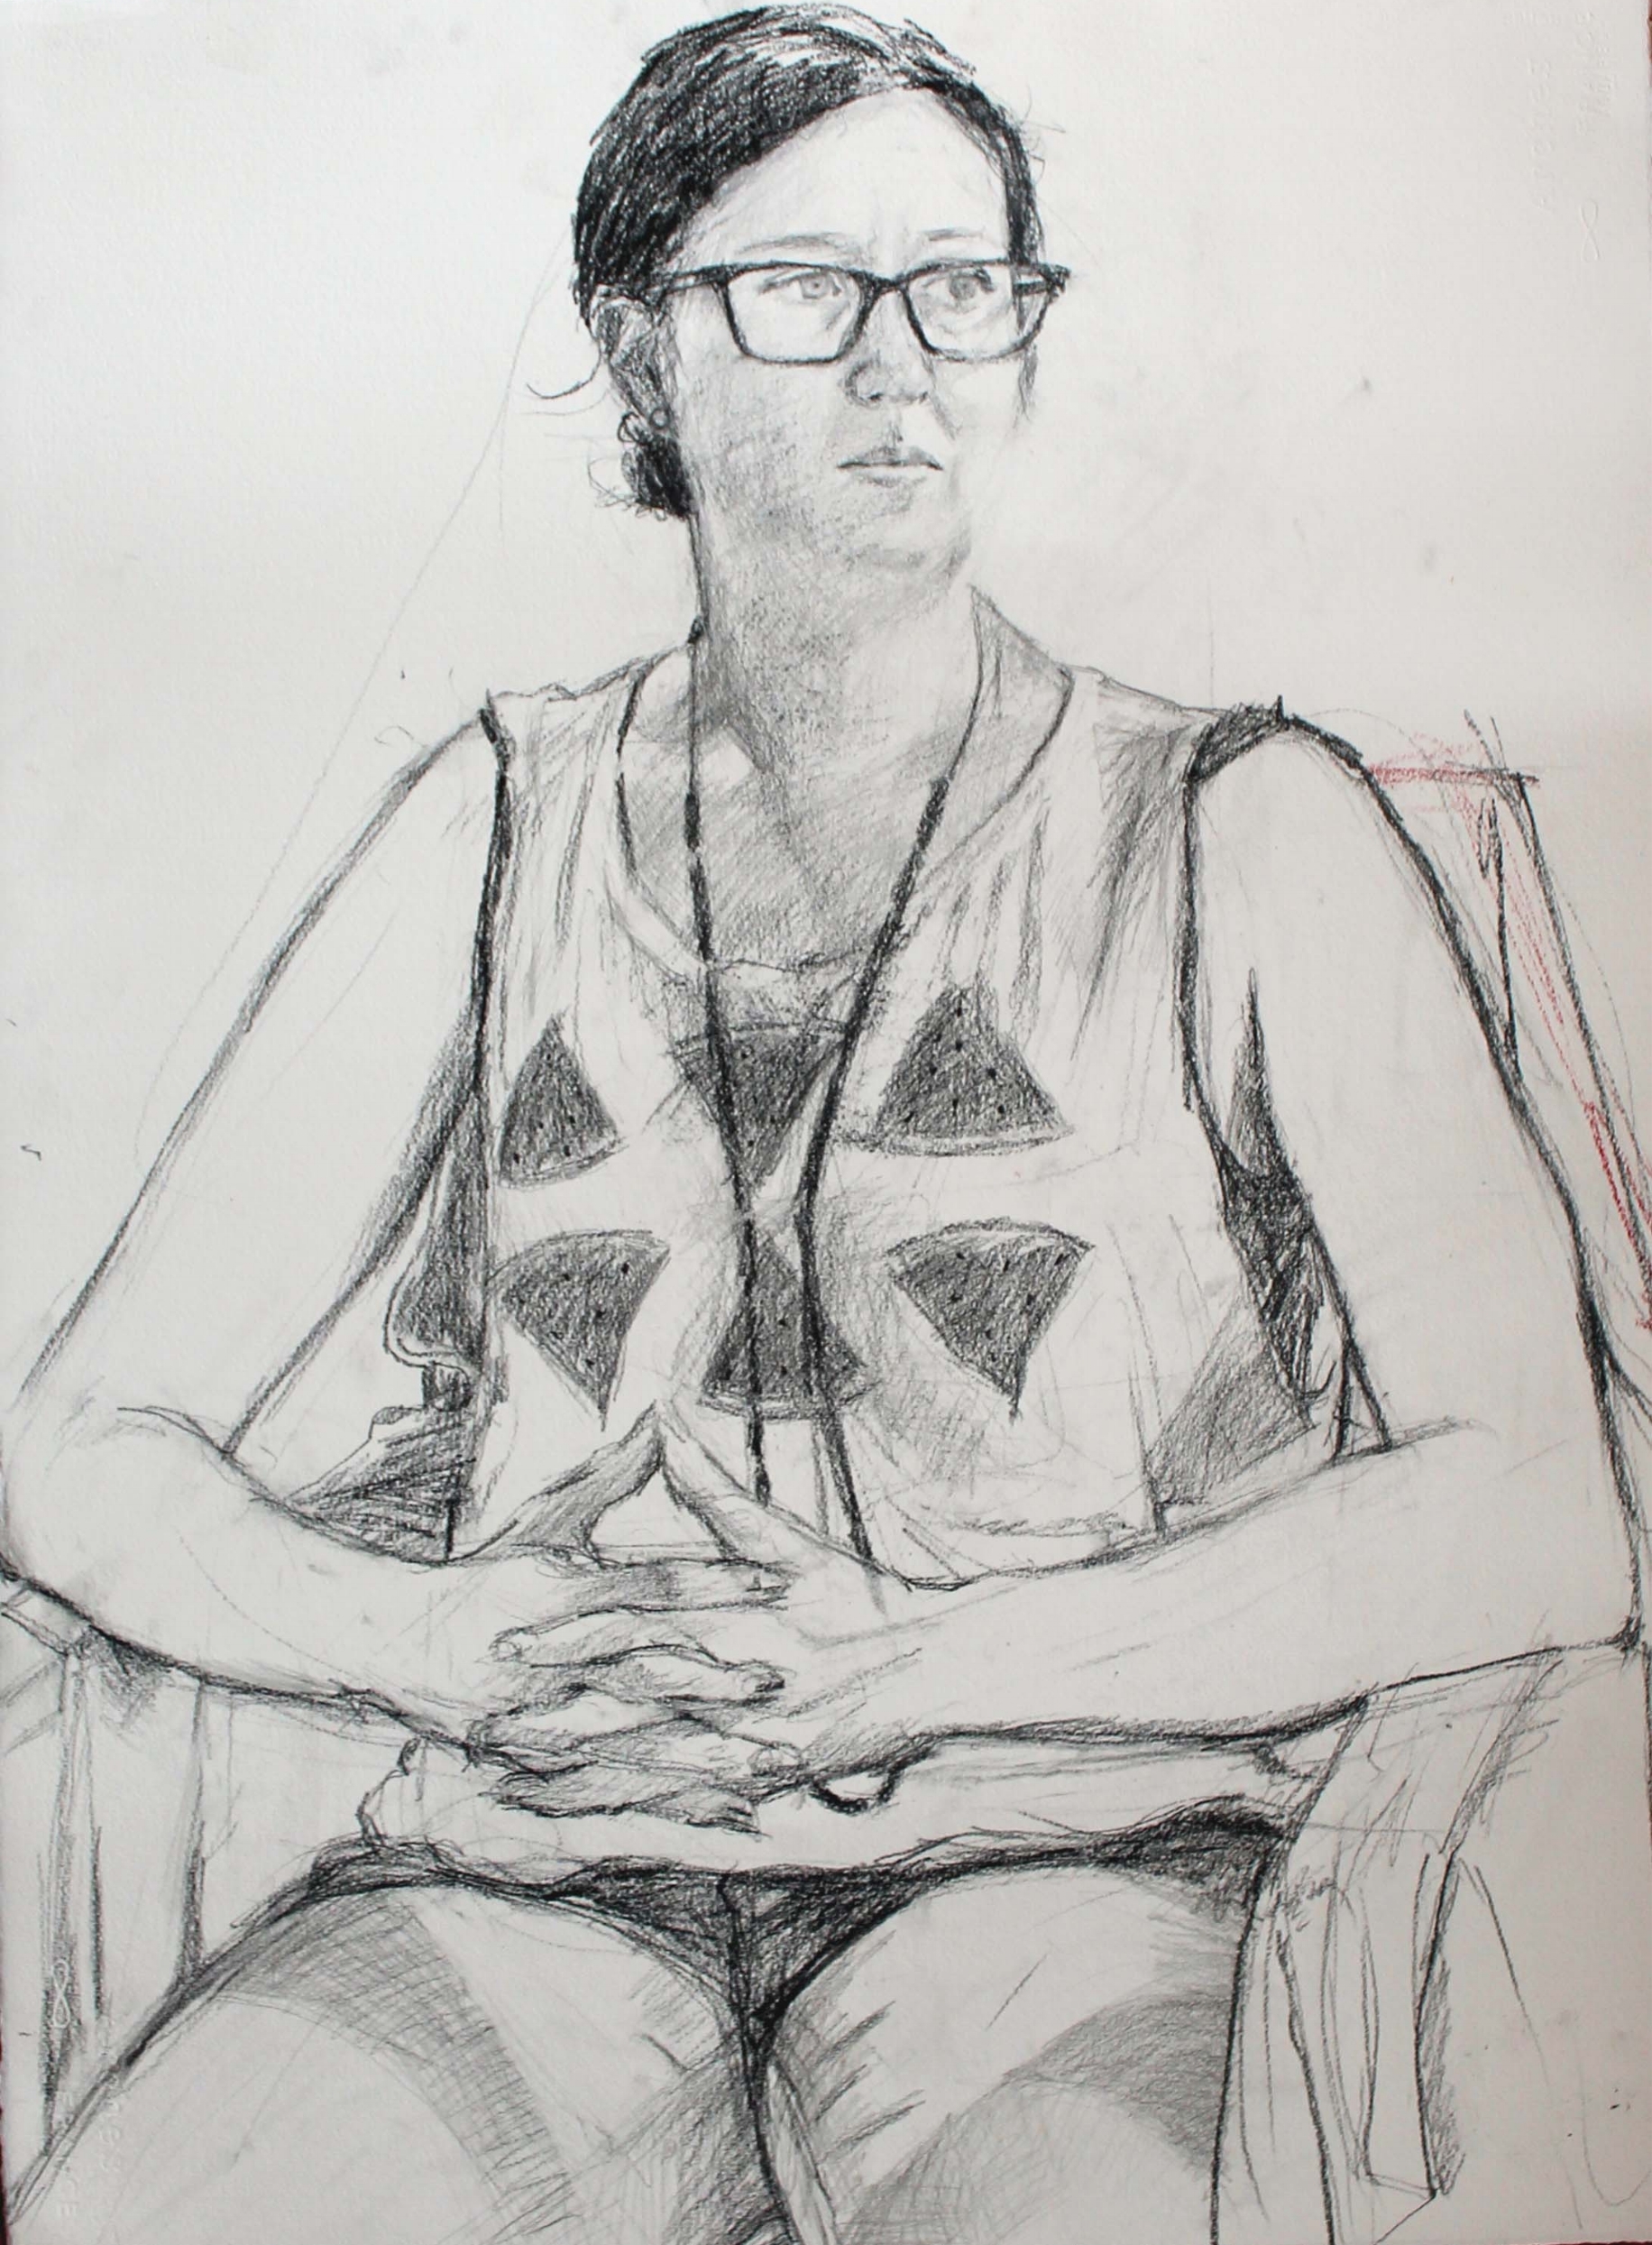   Sheryl , 2014. Graphite on Arches paper, 30 x 22" 